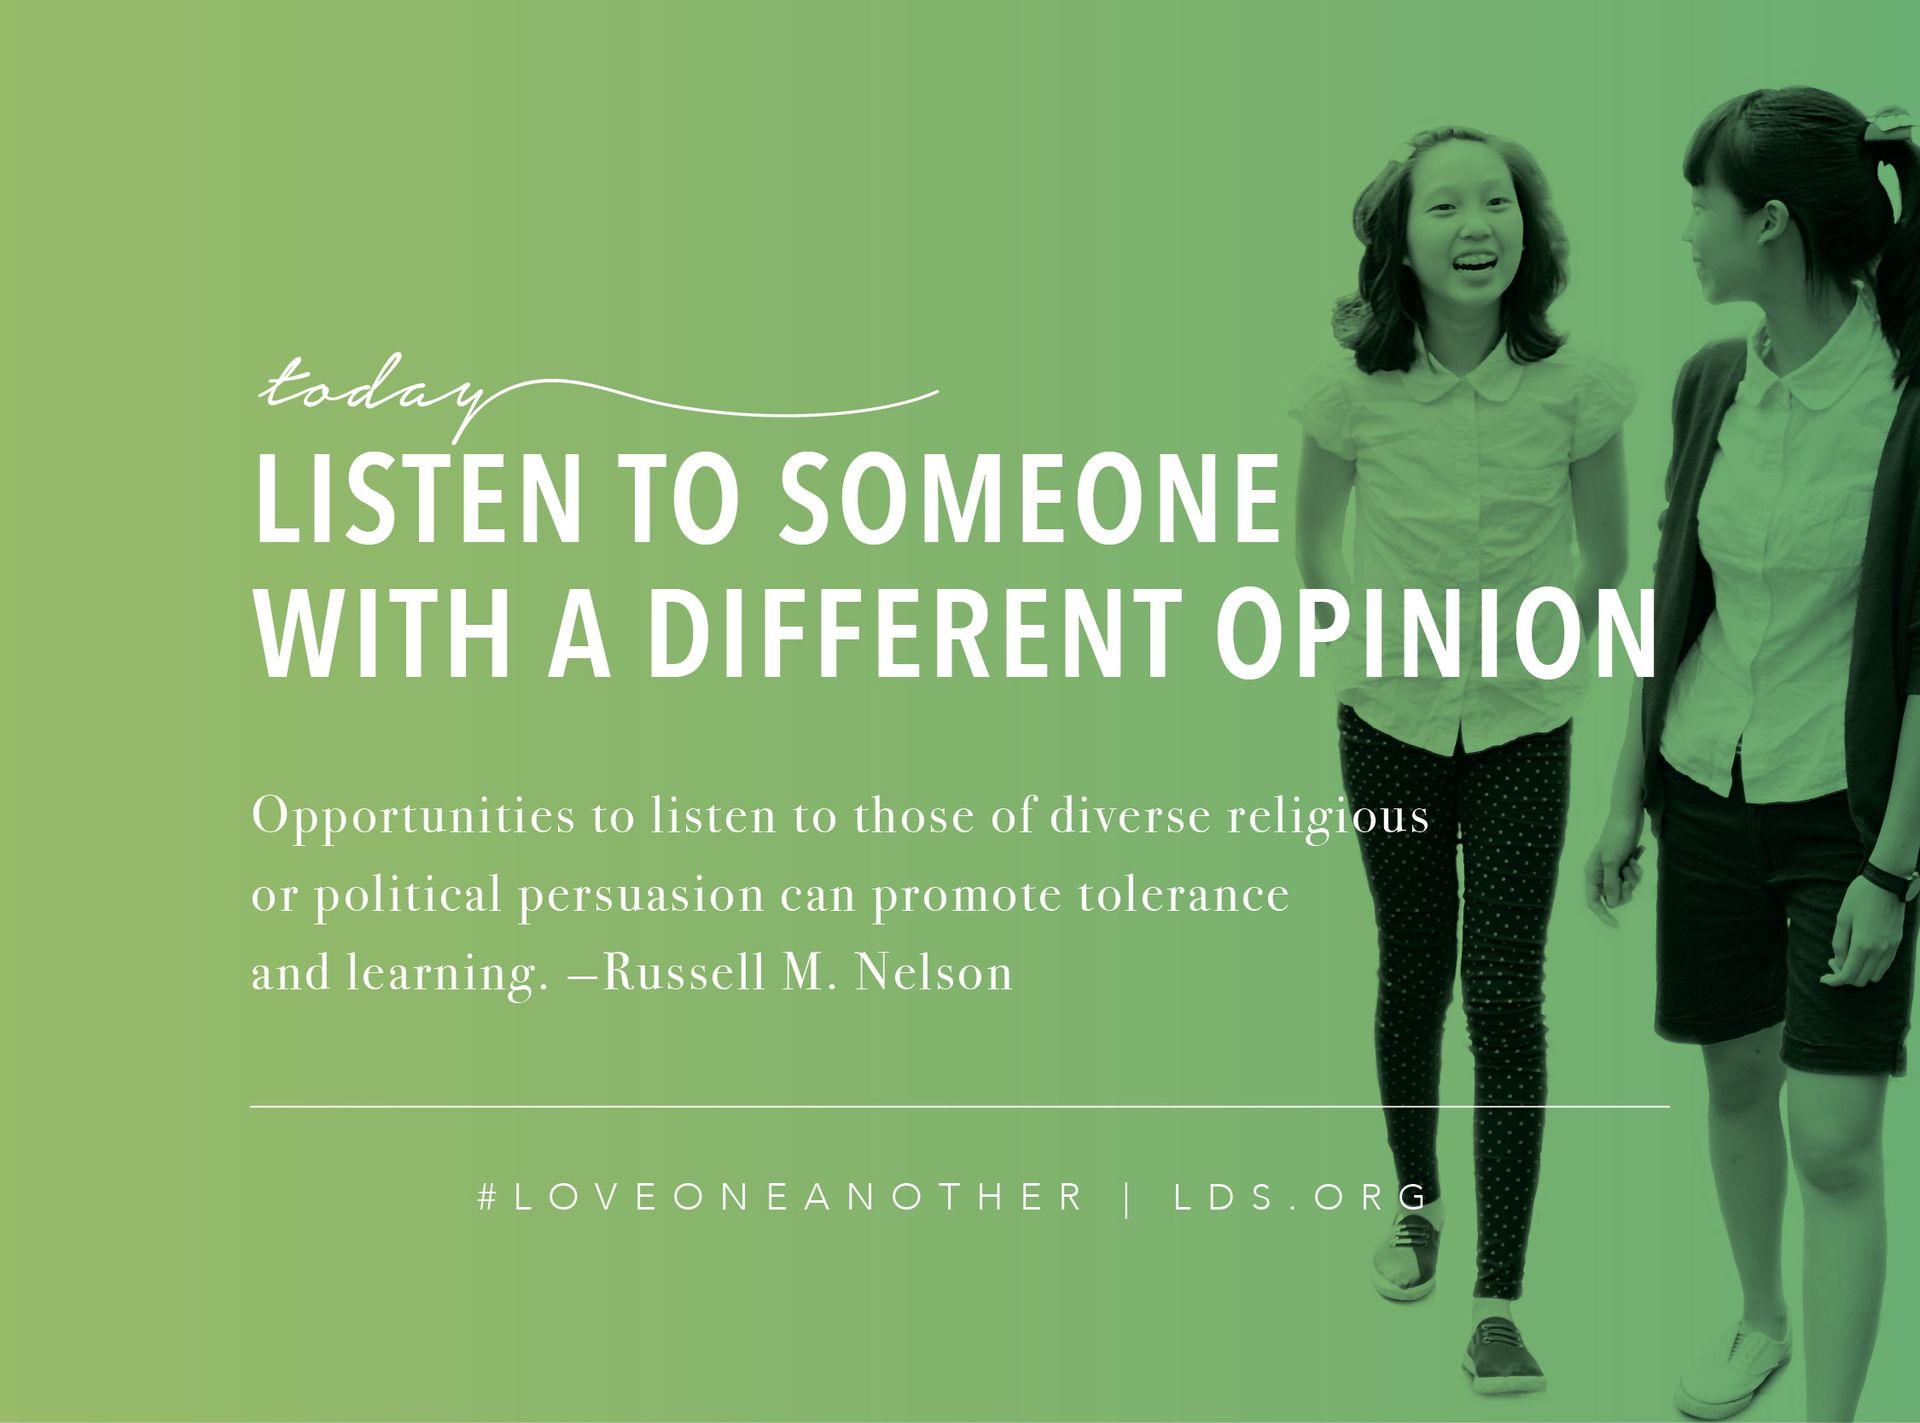 Today, listen to someone with a different opinion. “Opportunities to listen to those of diverse religious or political persuasion can promote tolerance and learning.” —Russell M. Nelson, "Listen to Learn" #loveoneanother LDS.org © undefined ipCode 1.